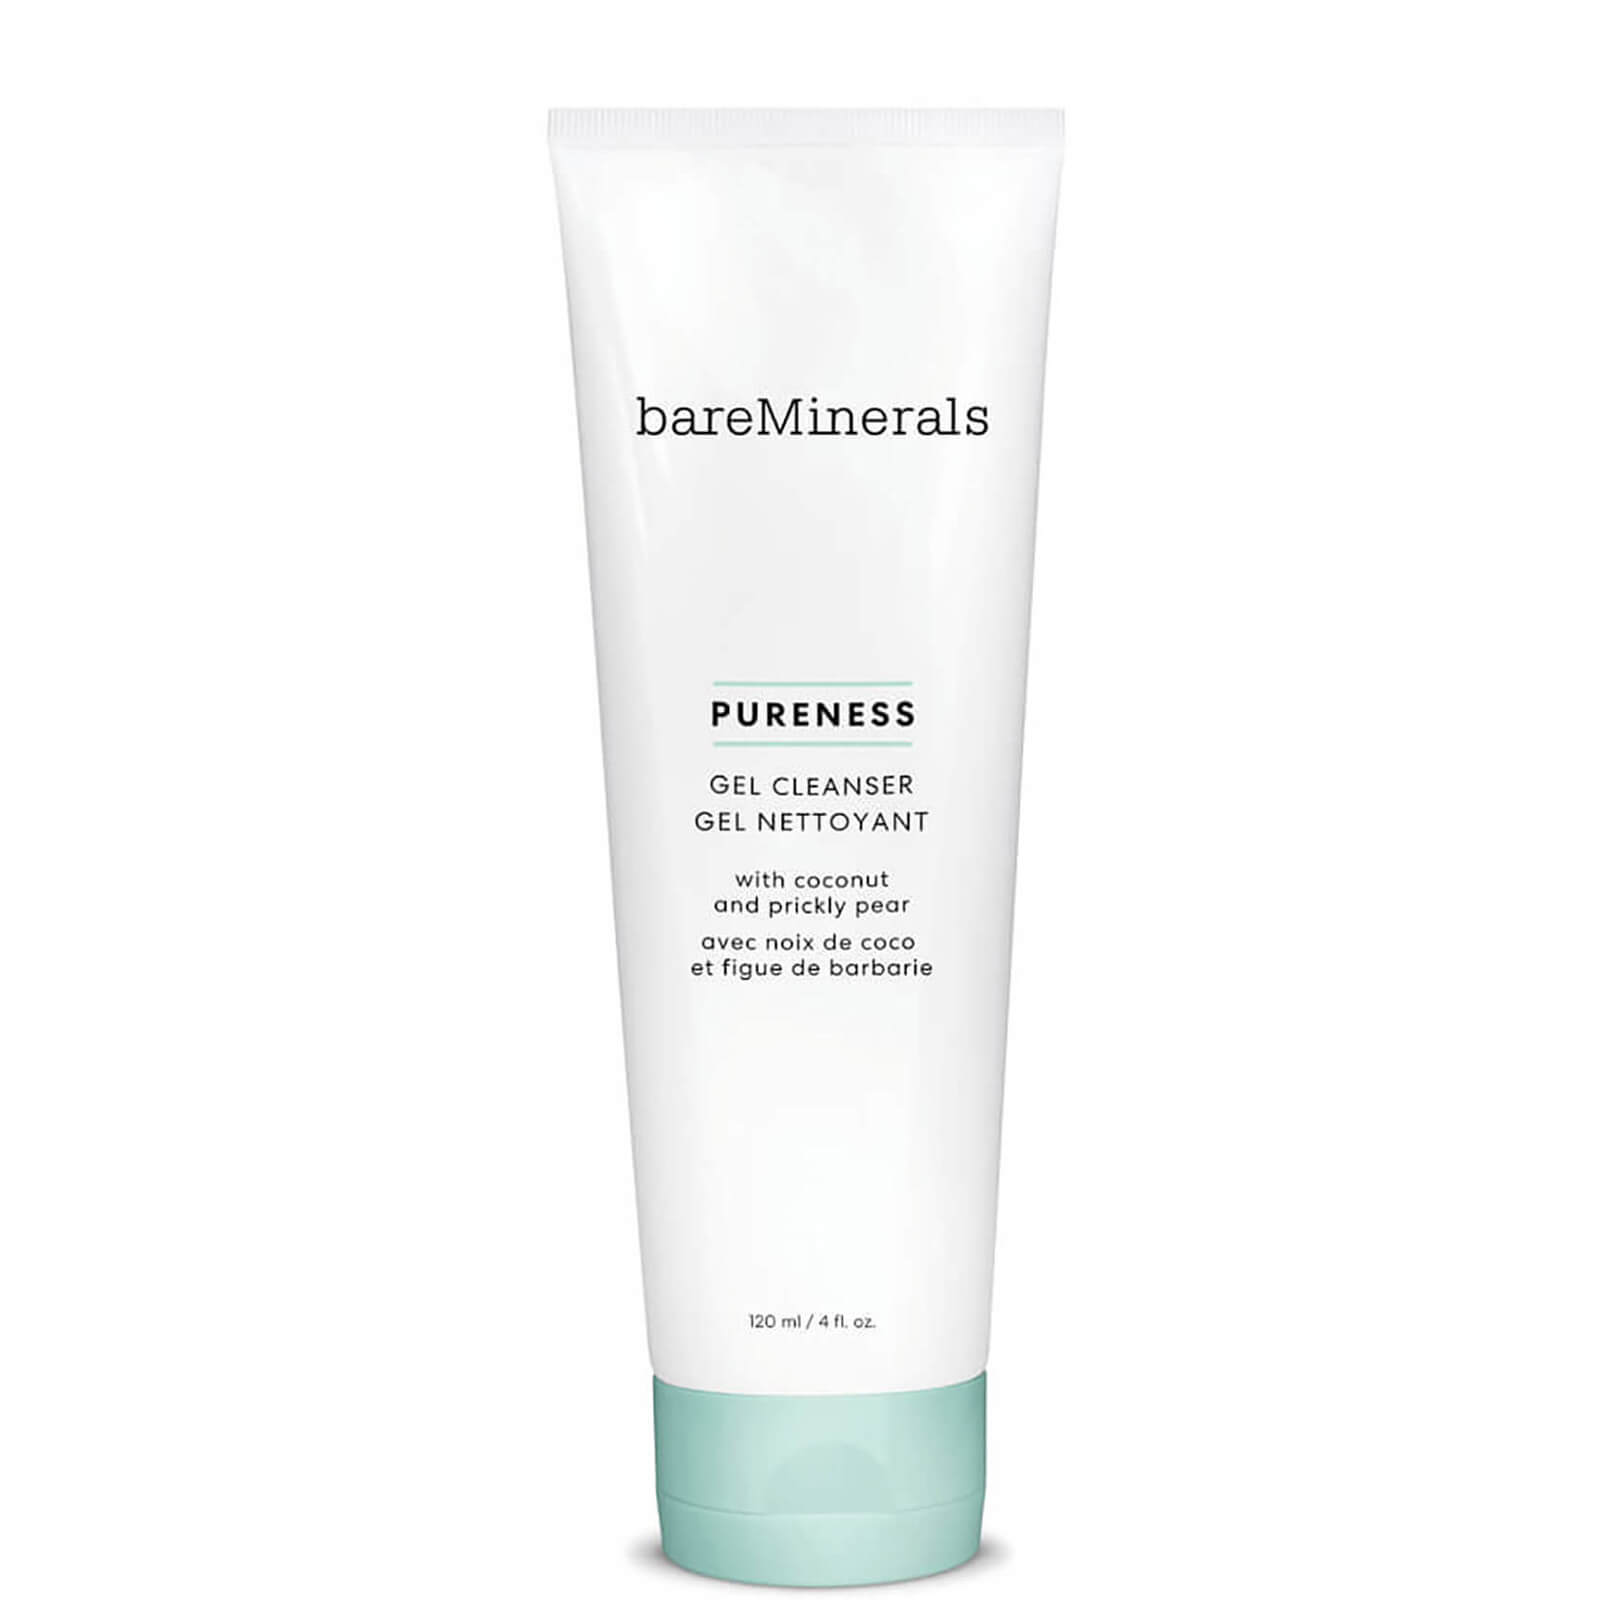 Photos - Facial / Body Cleansing Product bareMinerals Pureness Gel Cleanser 120ml 93034 